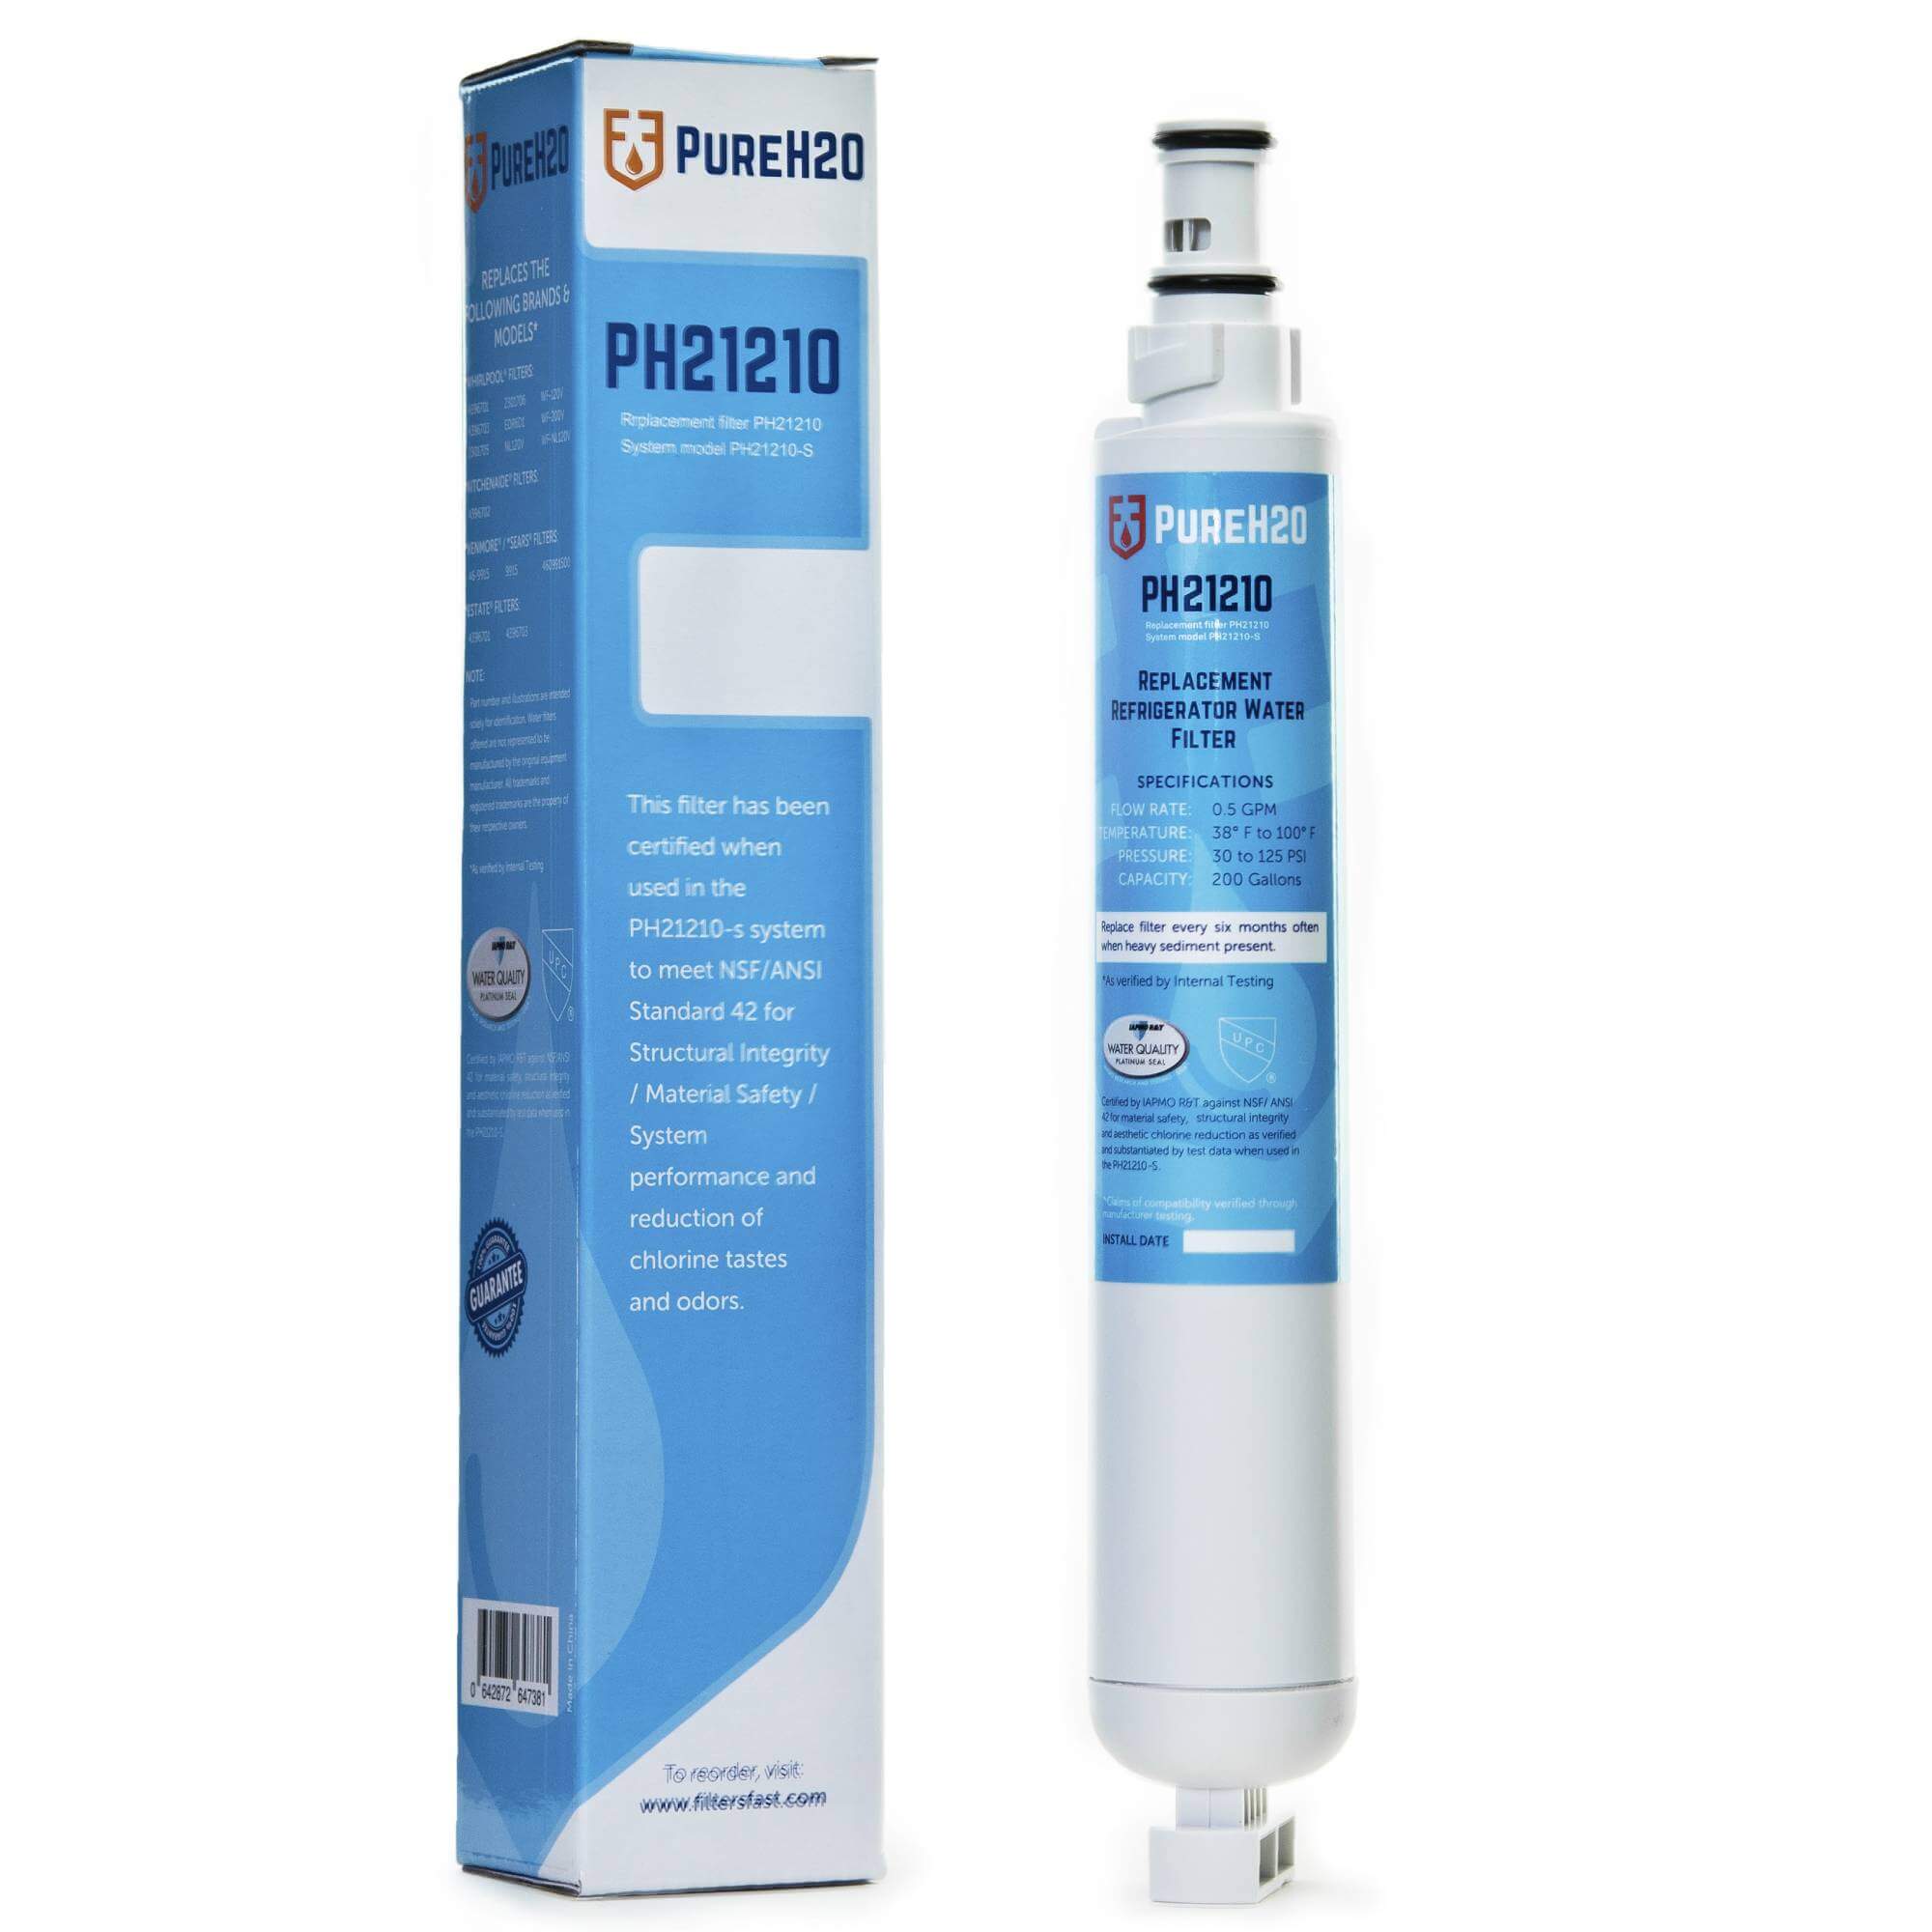 PureH2O PH21210 Replacement for everydrop EDR6D1